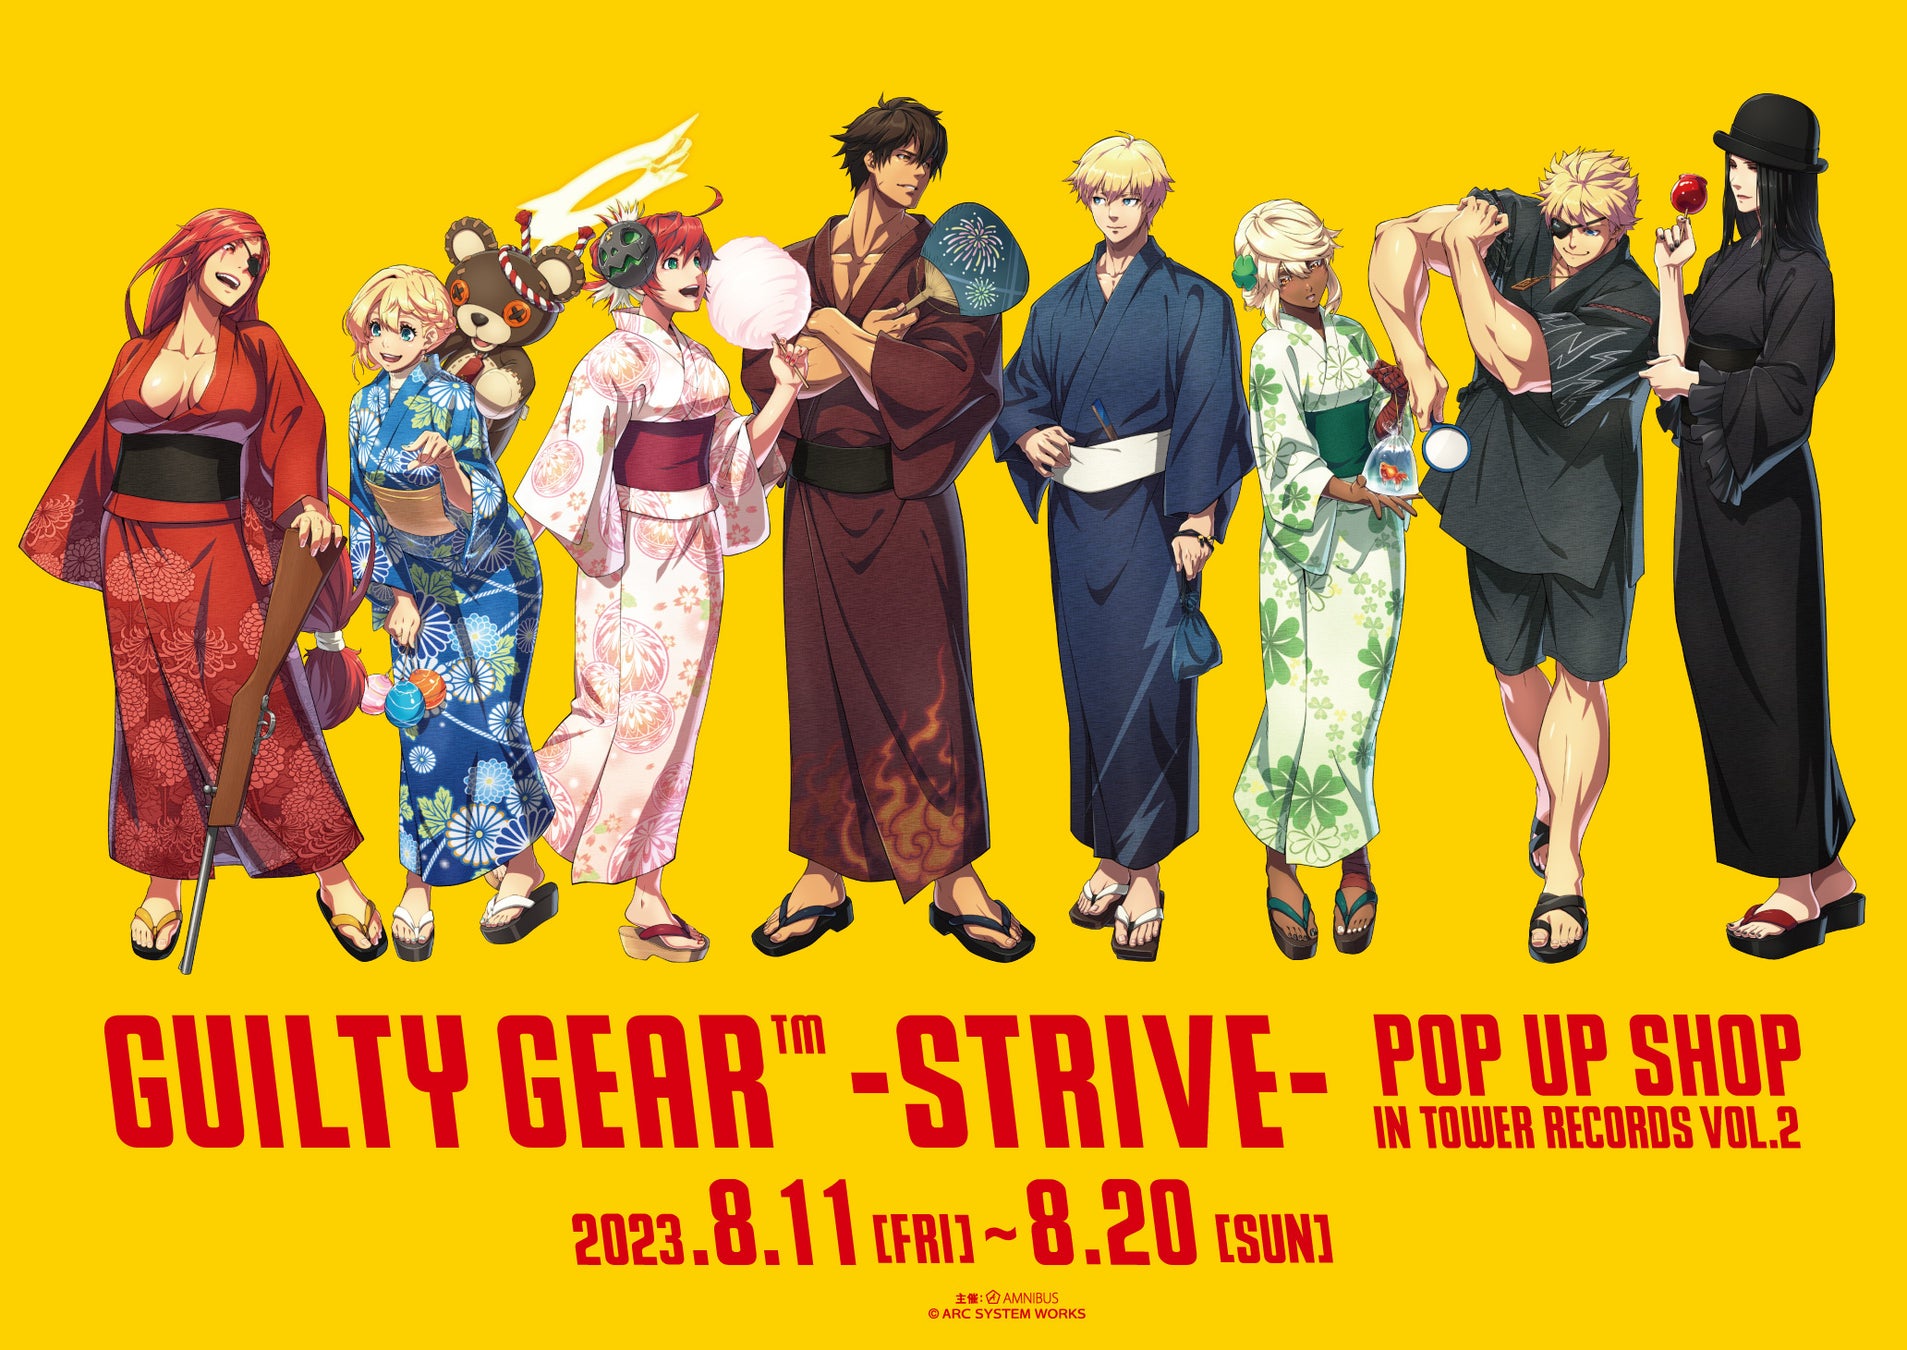 『GUILTY GEAR™ -STRIVE-』のイベント「GUILTY GEAR™ -STRIVE- POP UP SHOP in TOWER RECORDS vol.2」の開催が決定！